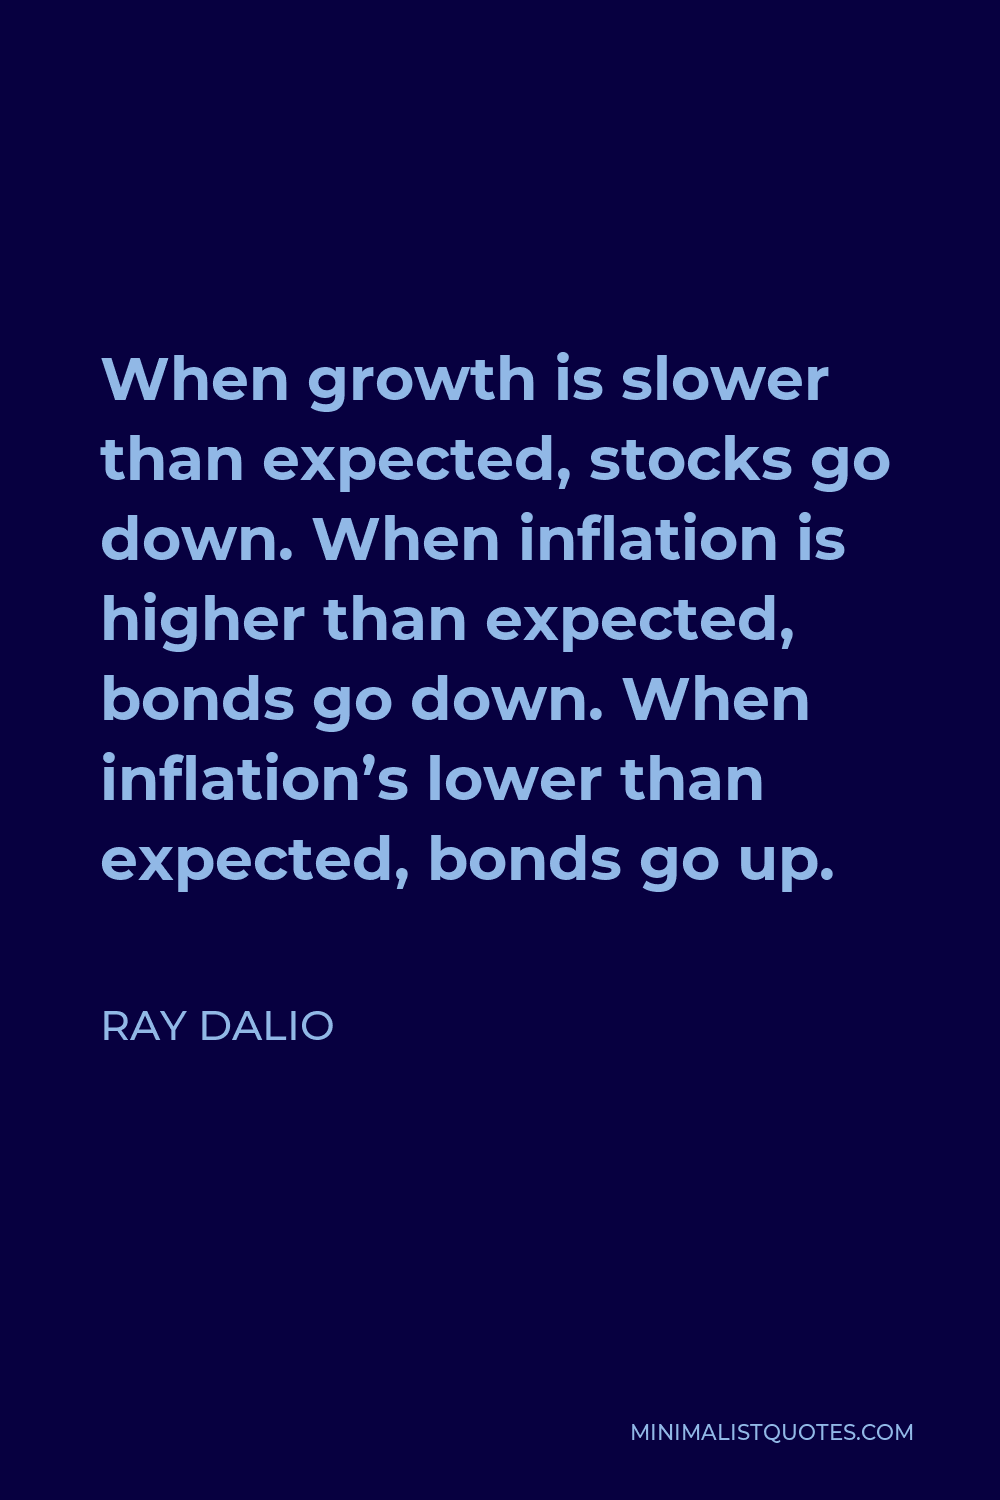 Ray Dalio Quote - When growth is slower than expected, stocks go down. When inflation is higher than expected, bonds go down. When inflation’s lower than expected, bonds go up.